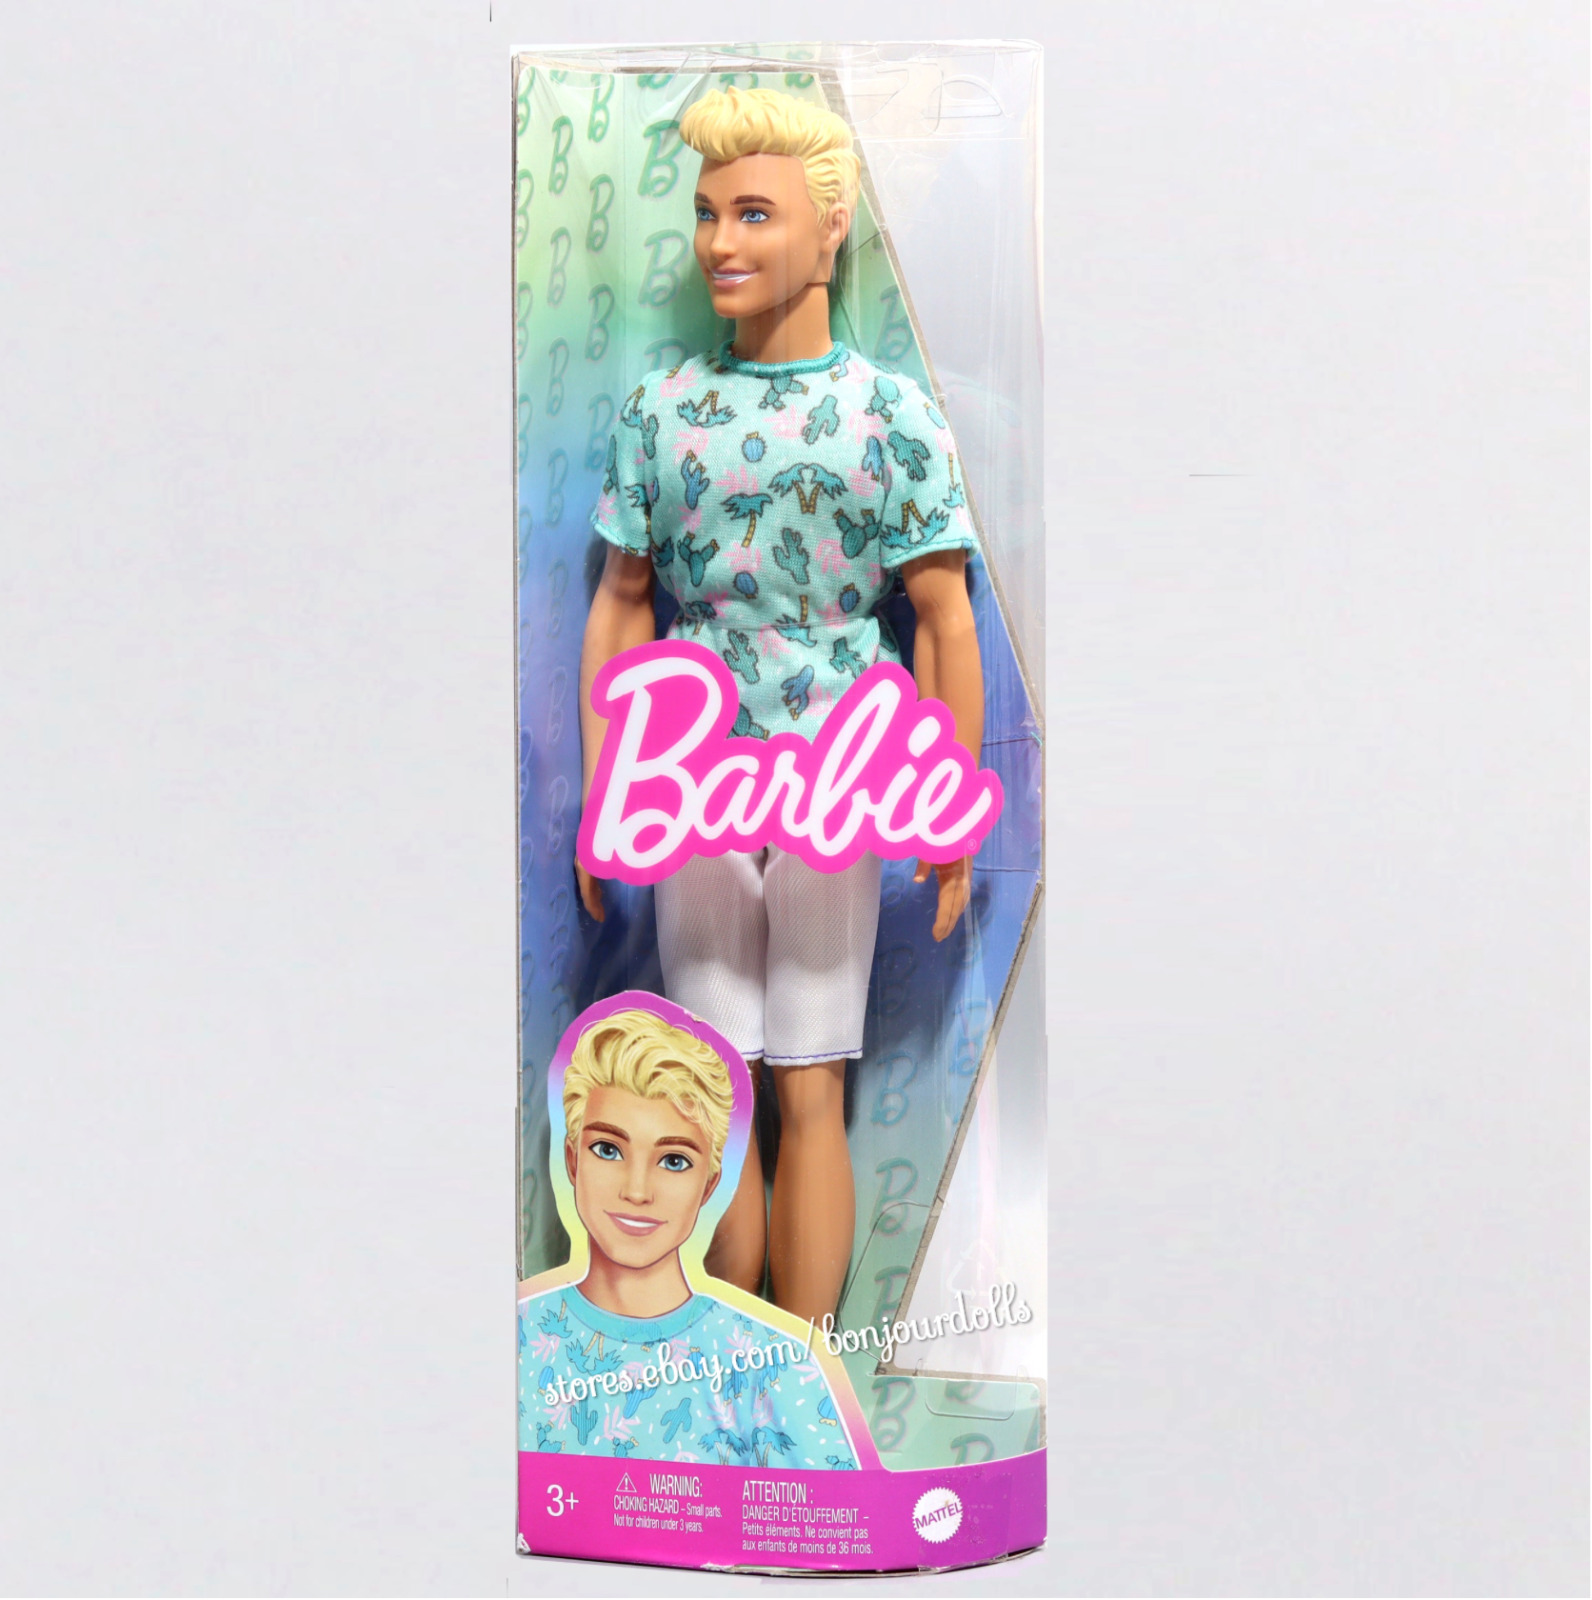 Barbie Ken Fashionistas Doll #211 with Blond Hair and Cactus Tee - HJT10